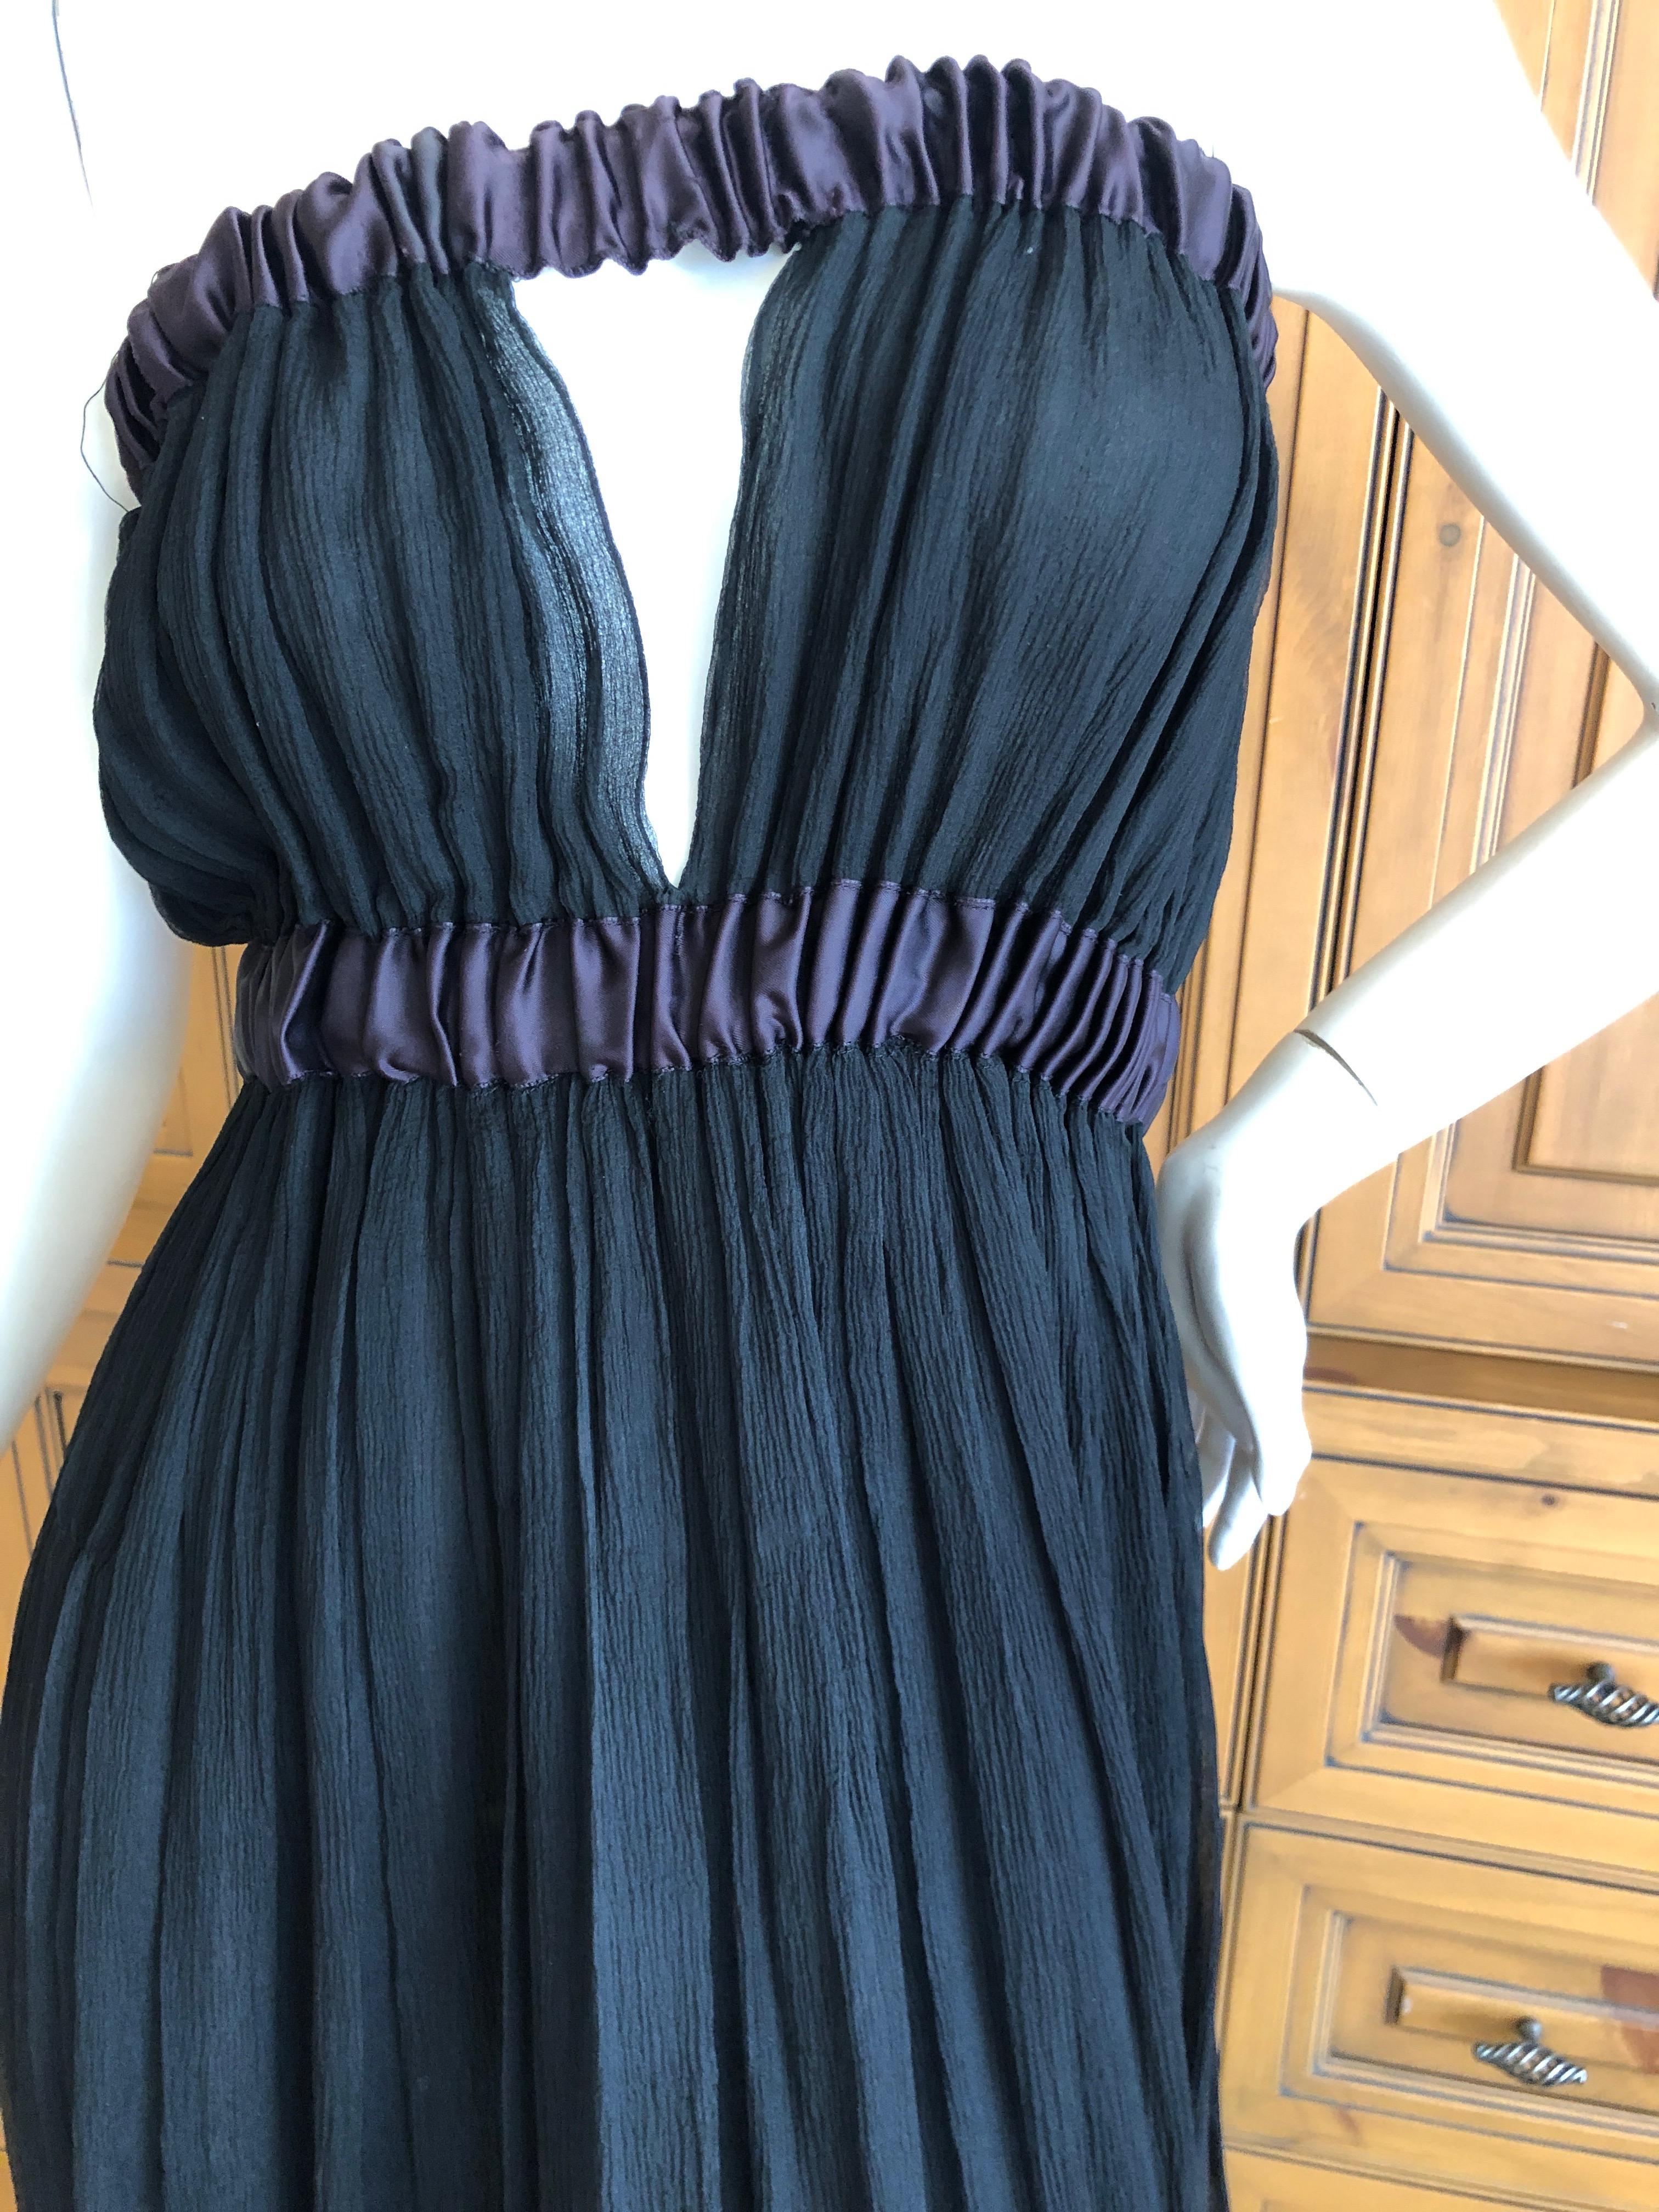 Yves Saint Laurent Rive Gauche Black Pleated Strapless Keyhole Dress .
So delightfully French.  Elasticized bust and waist.
Size 38
Bust 36